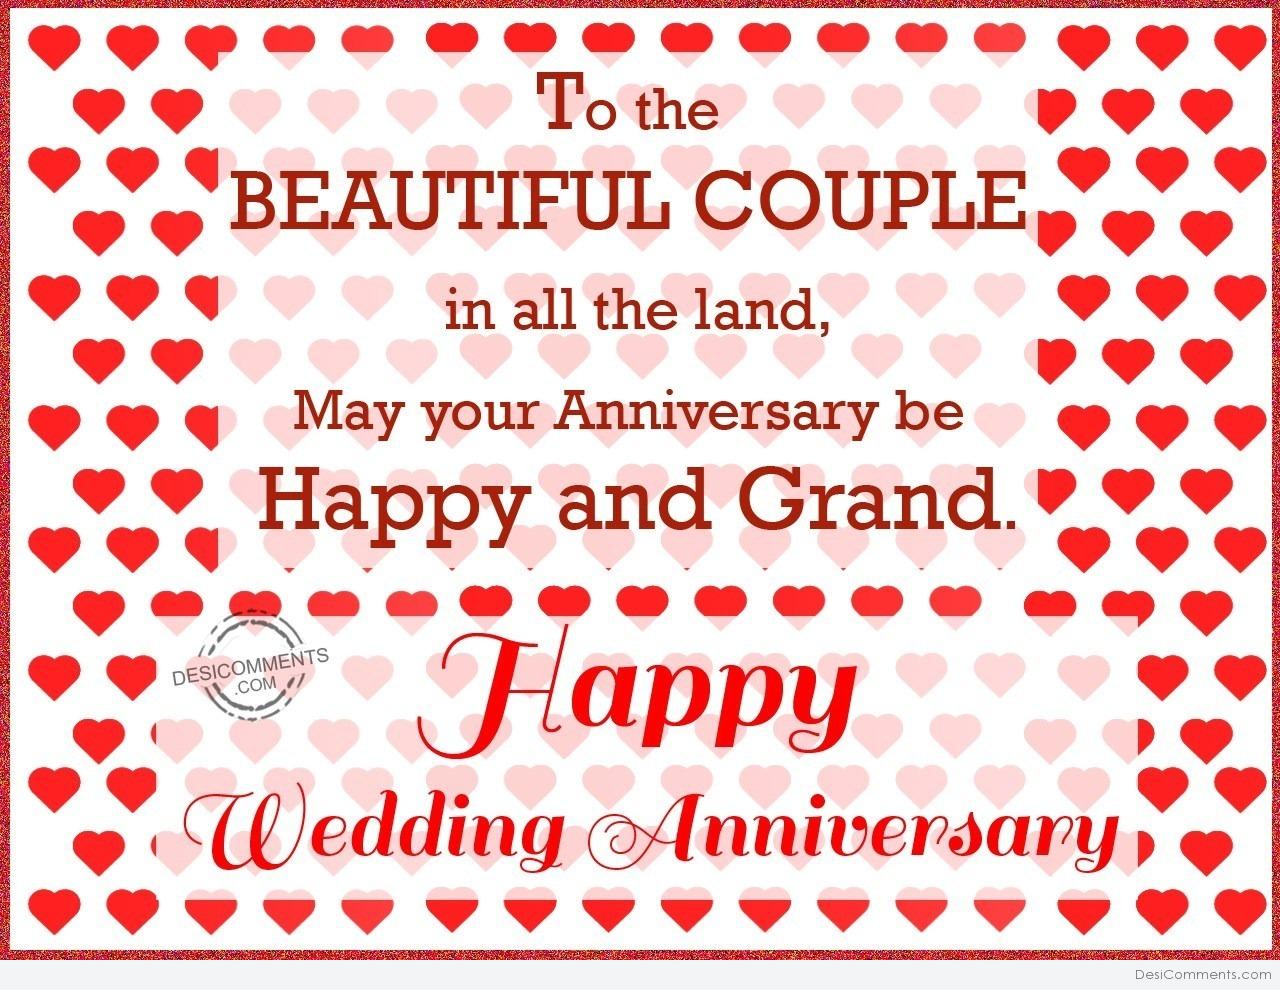 Happy Wedding Anniversary To The Beautiful Couple Desicomments Com